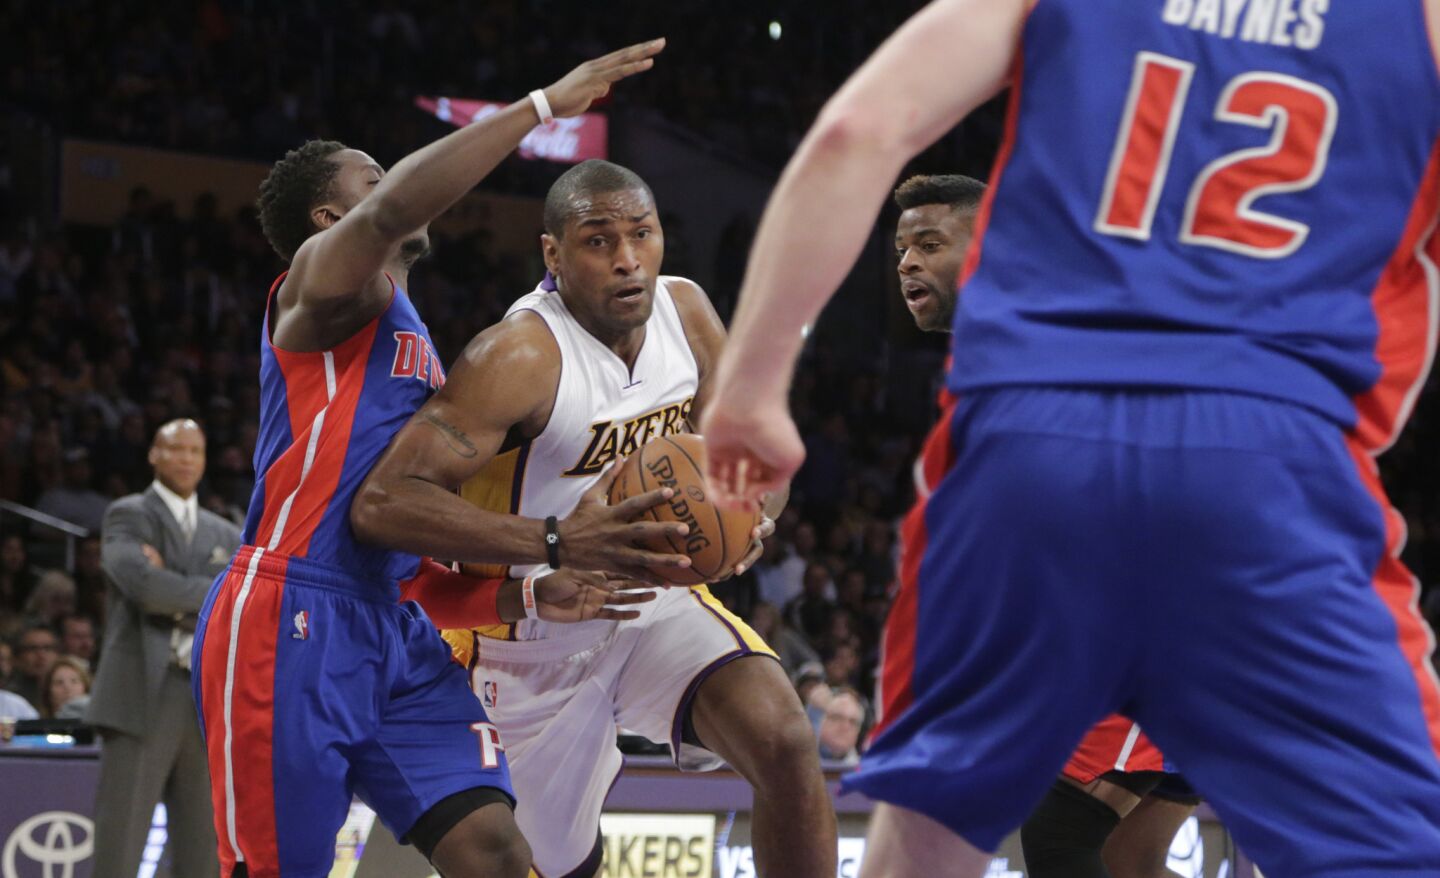 Lakers forward Metta World Peace drives to the basket against three Pistons defenders in the first half.